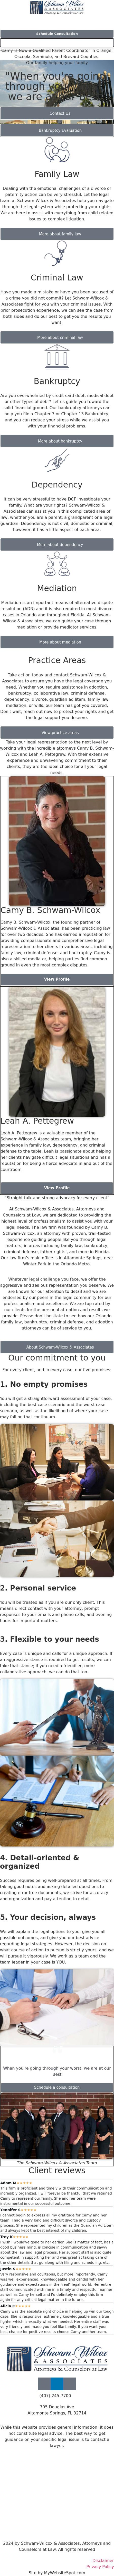 Schwam-Wilcox & Associates, Attorneys and Counselors at Law - Clermont FL Lawyers